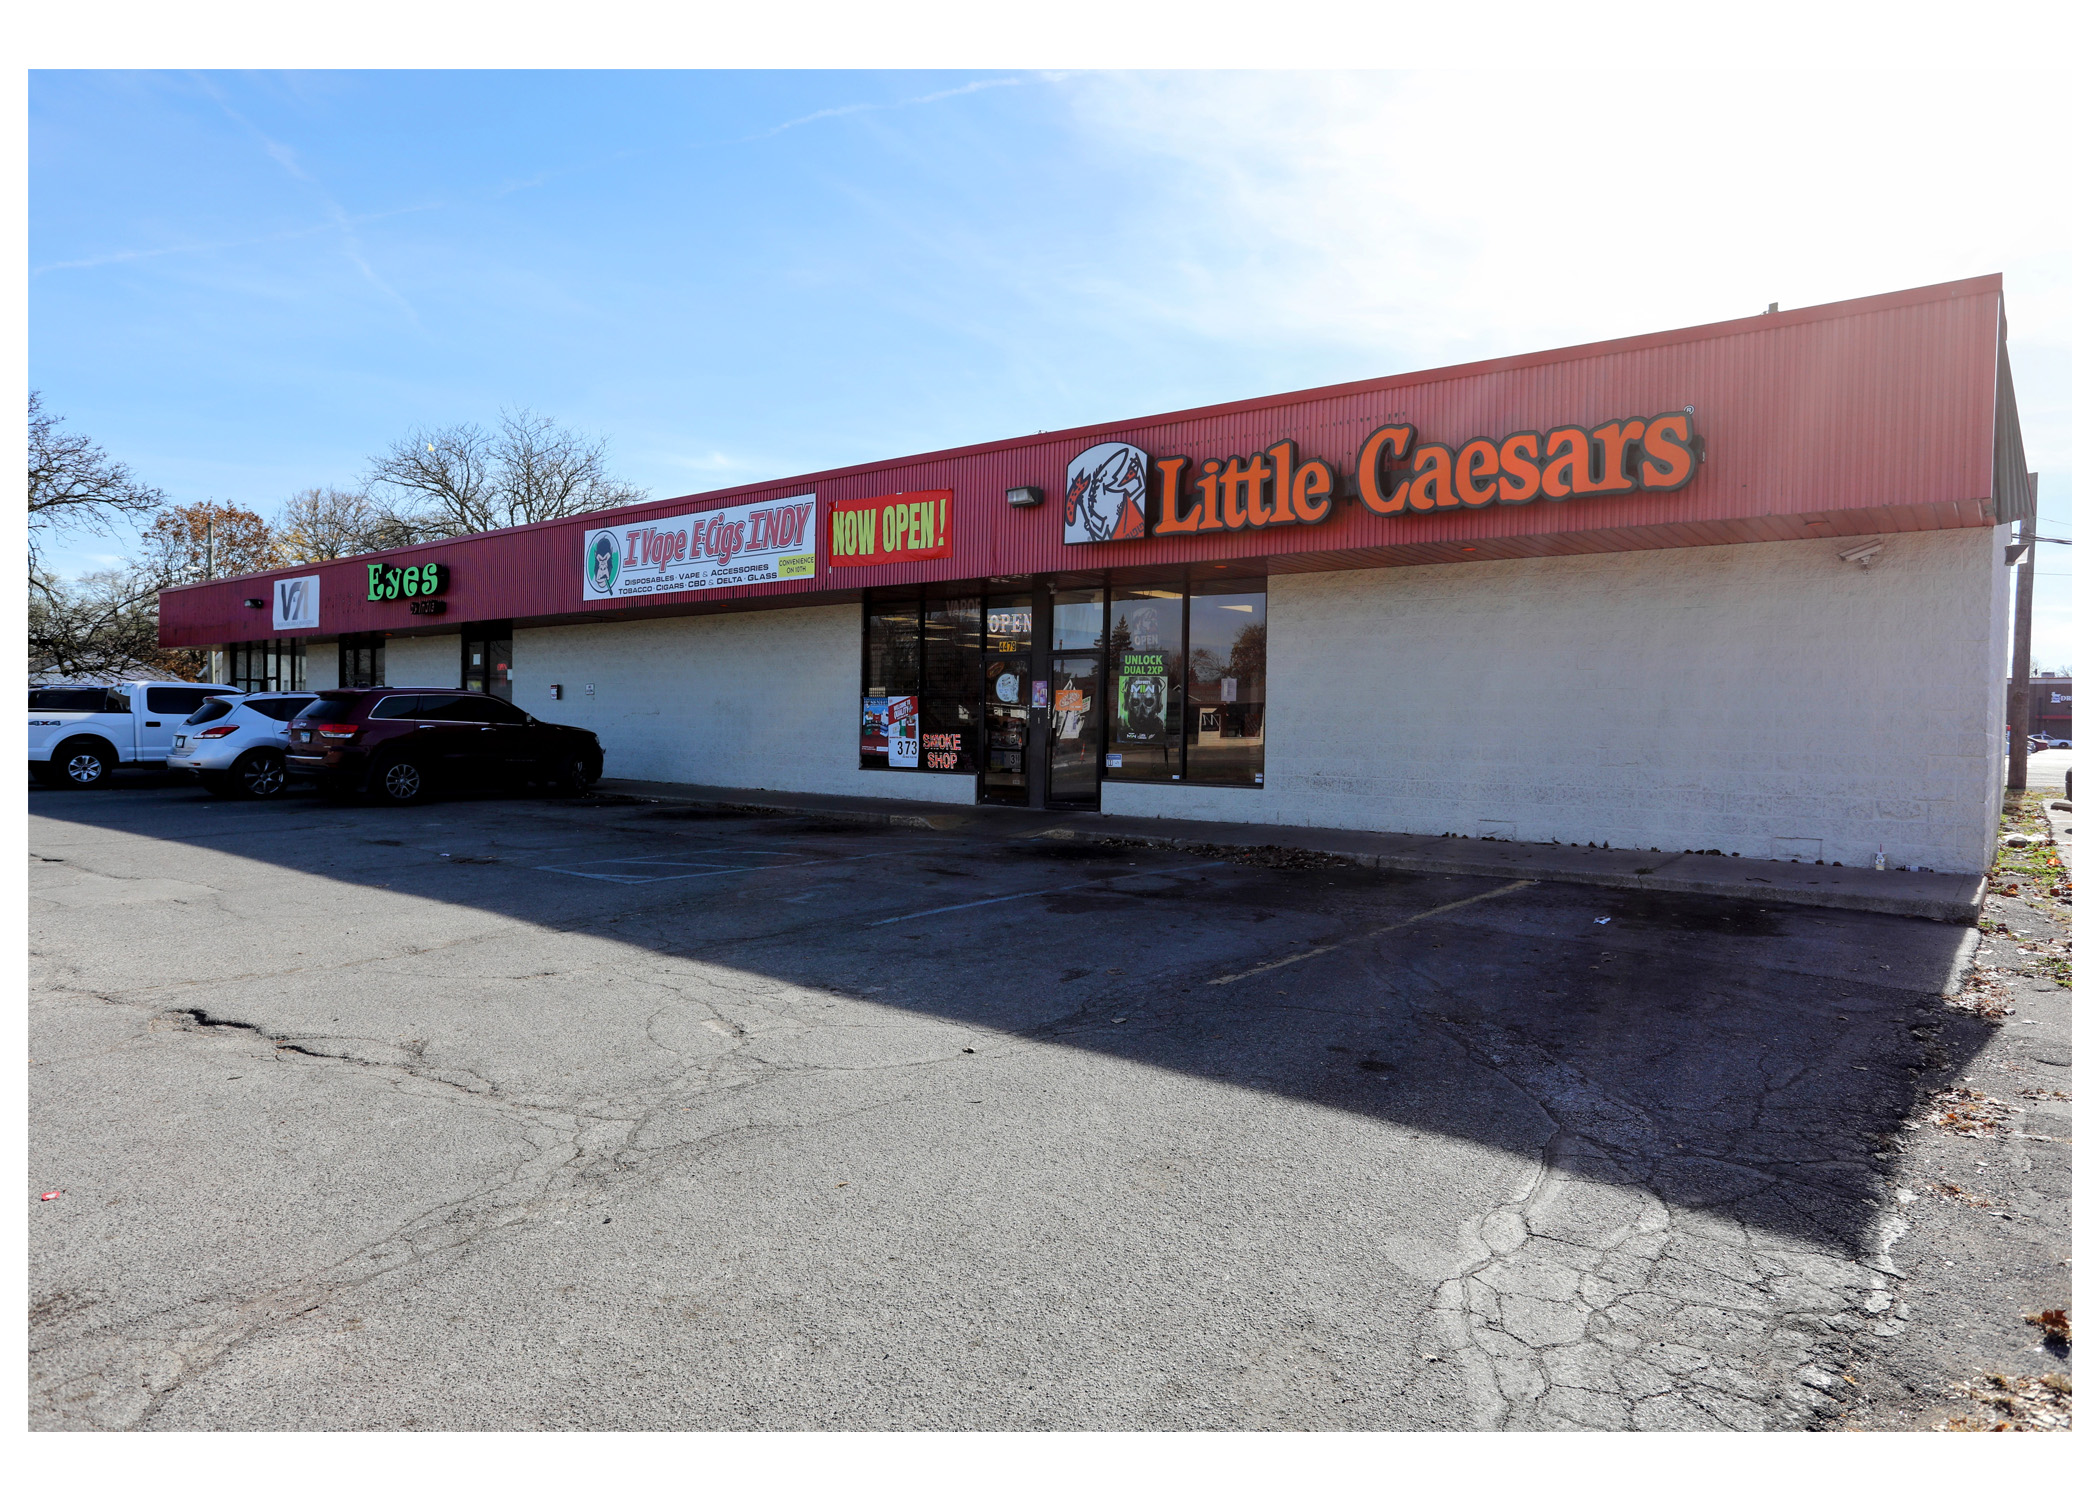 Linwood Square, Vaden's Firearms & Ammunition, Eyes by India, IVape eCigs Indy, and Little Caesars